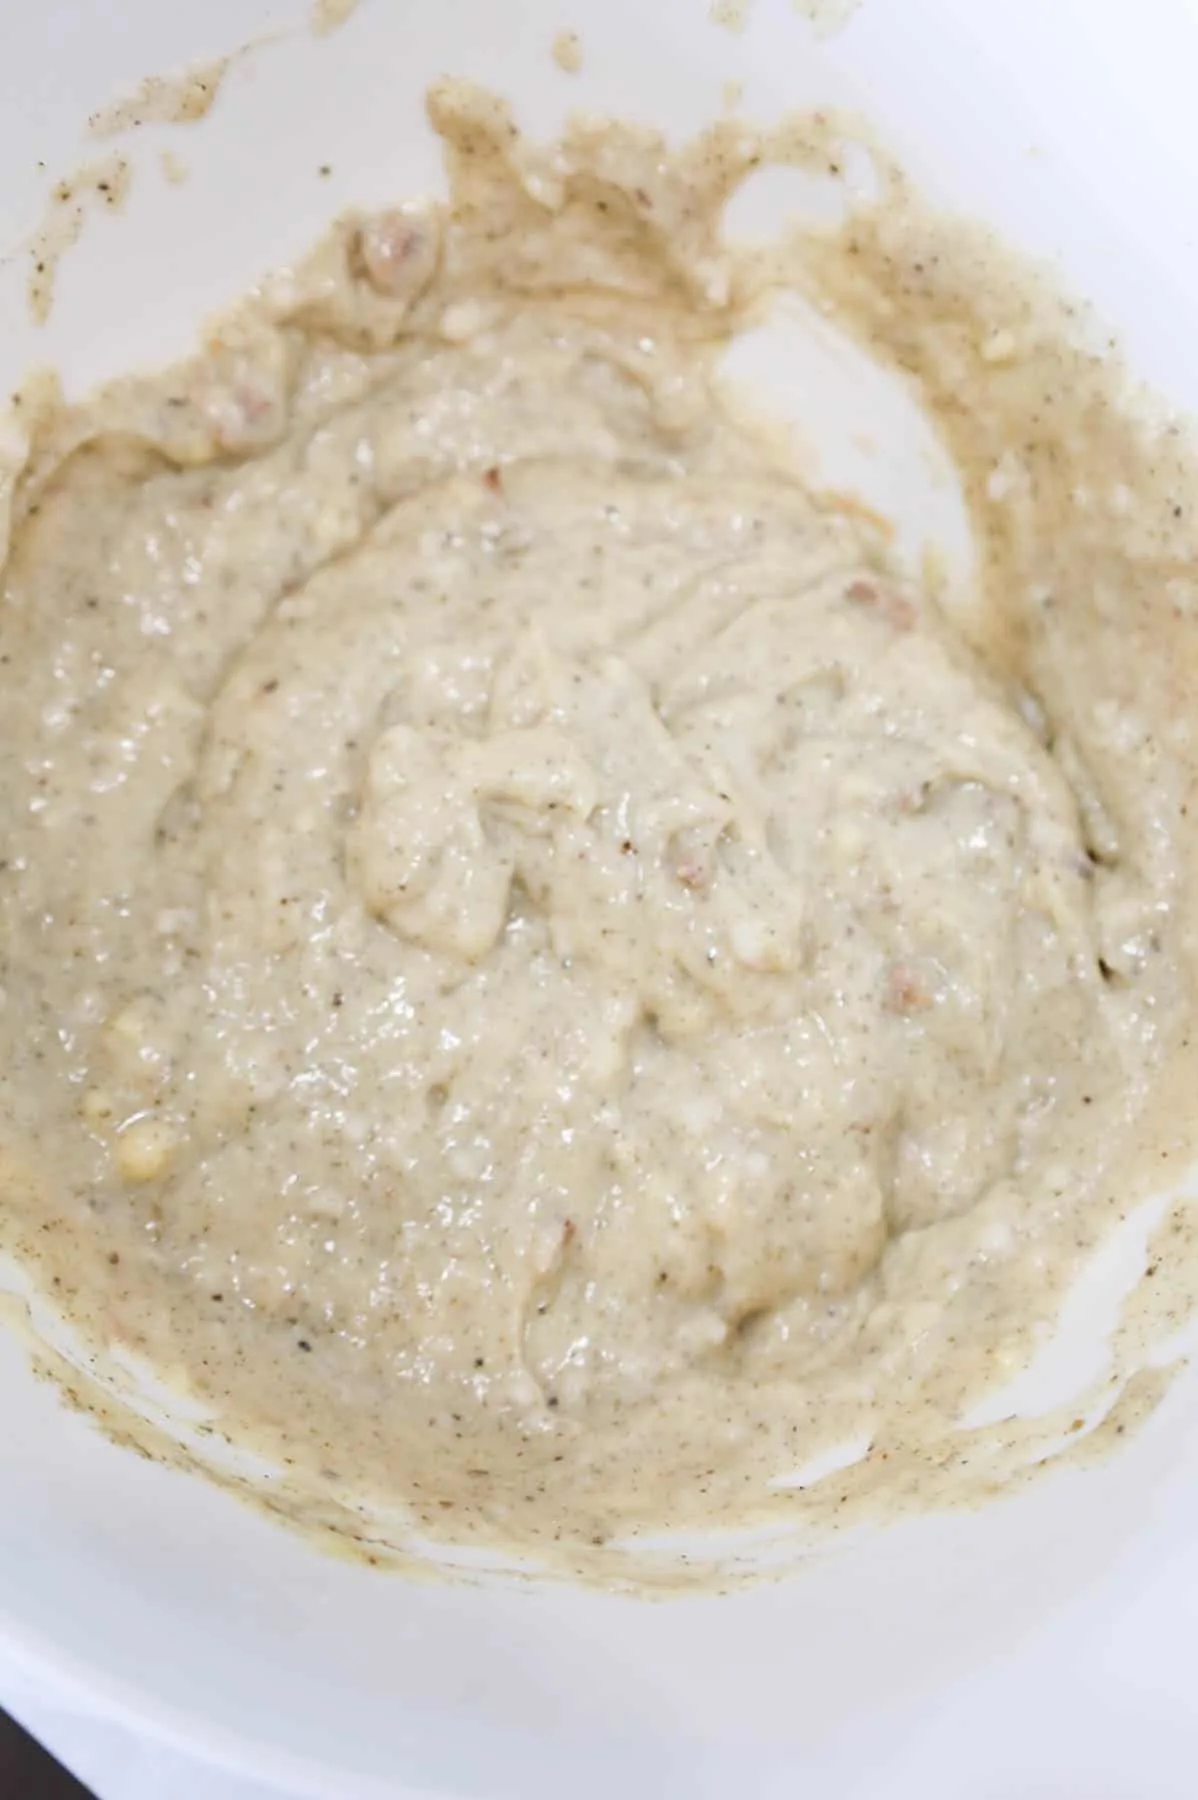 cream of mushroom soup, cream of chicken soup and seasonings mixture in a mixing bowl